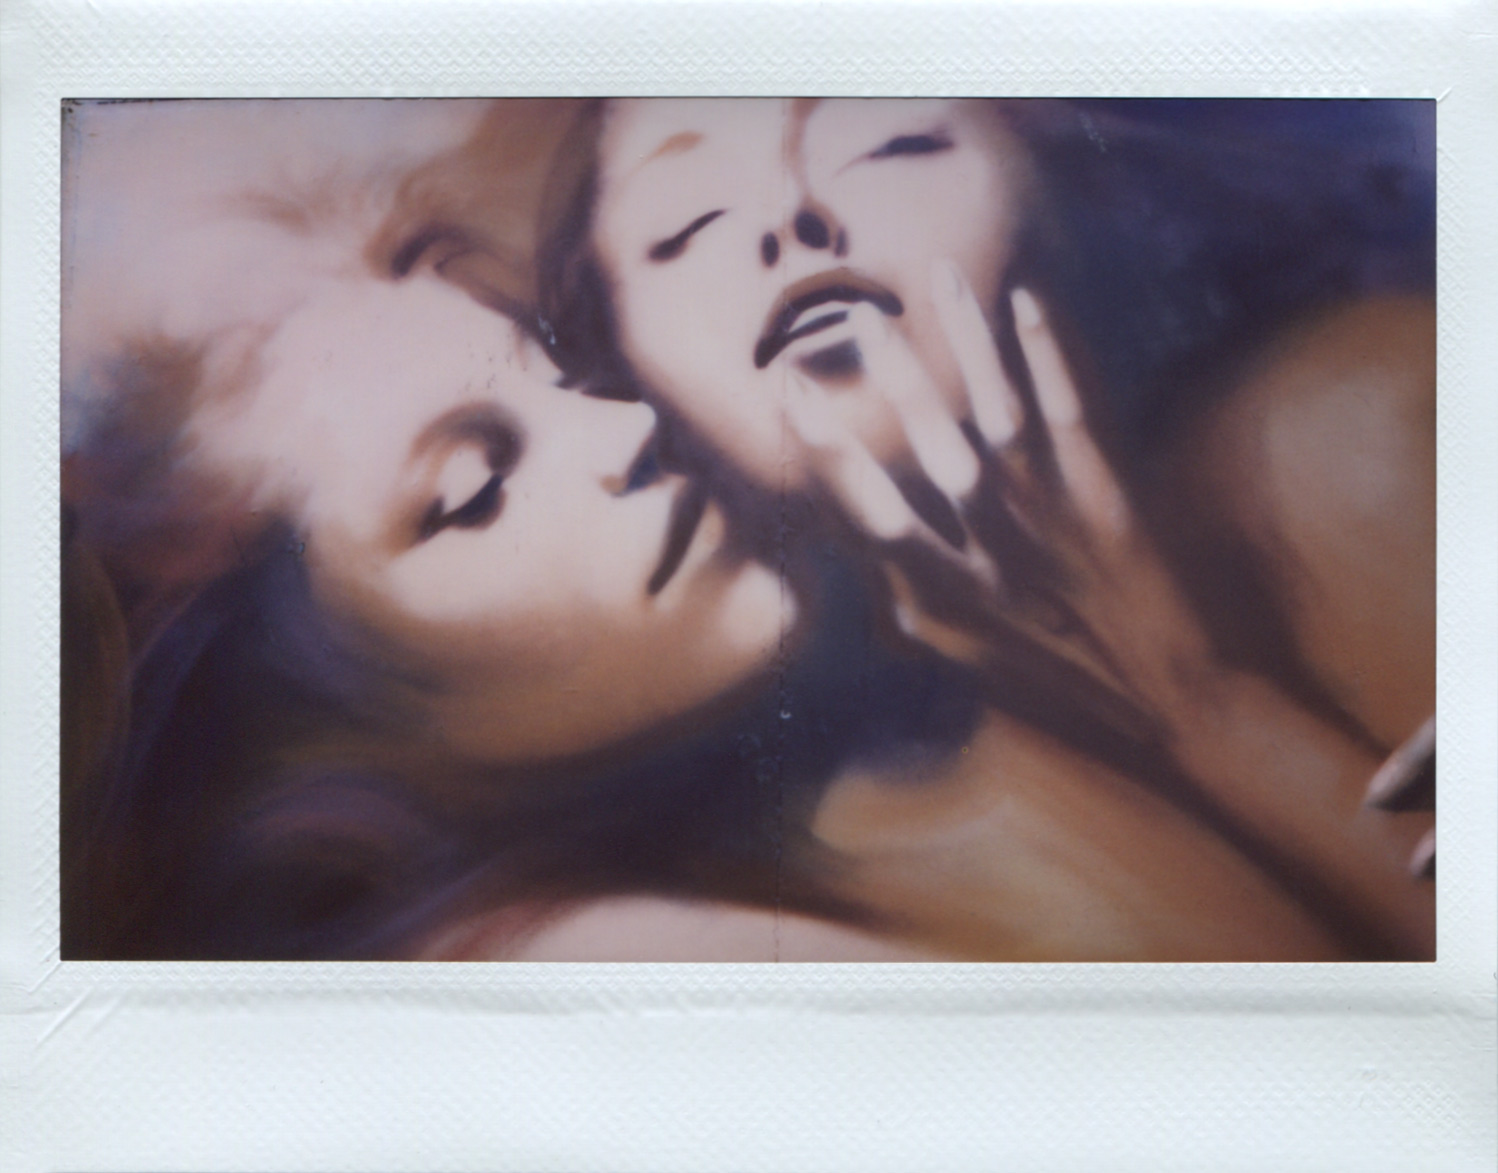 Far away so close: polaroid scenes from a would-be utopia